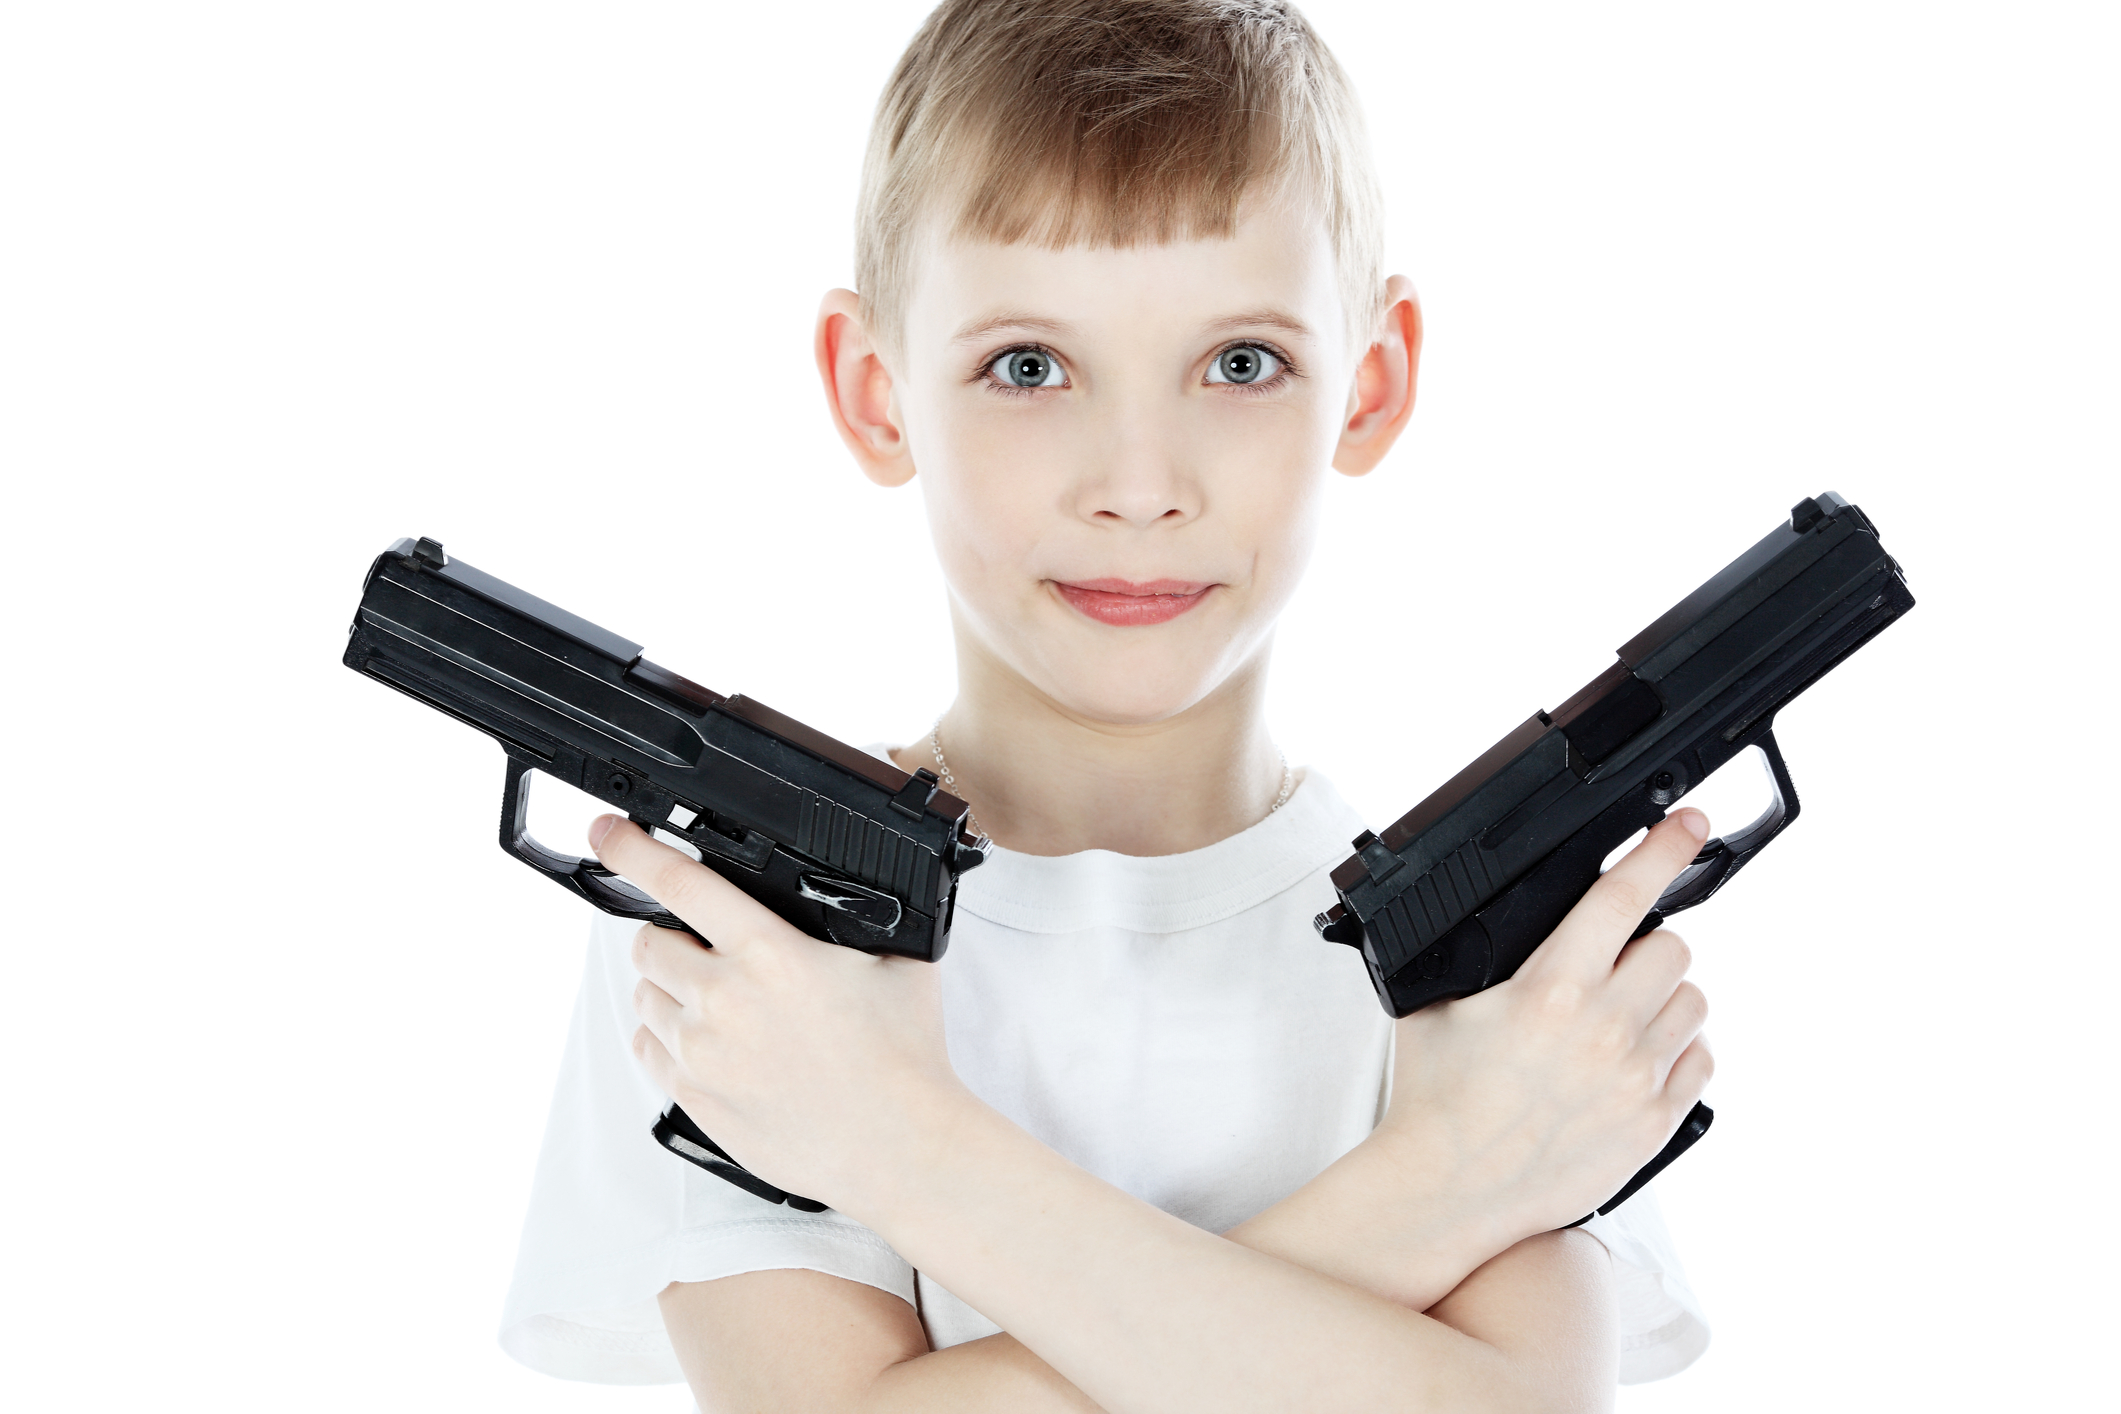 image of a child holding 2 toy guns